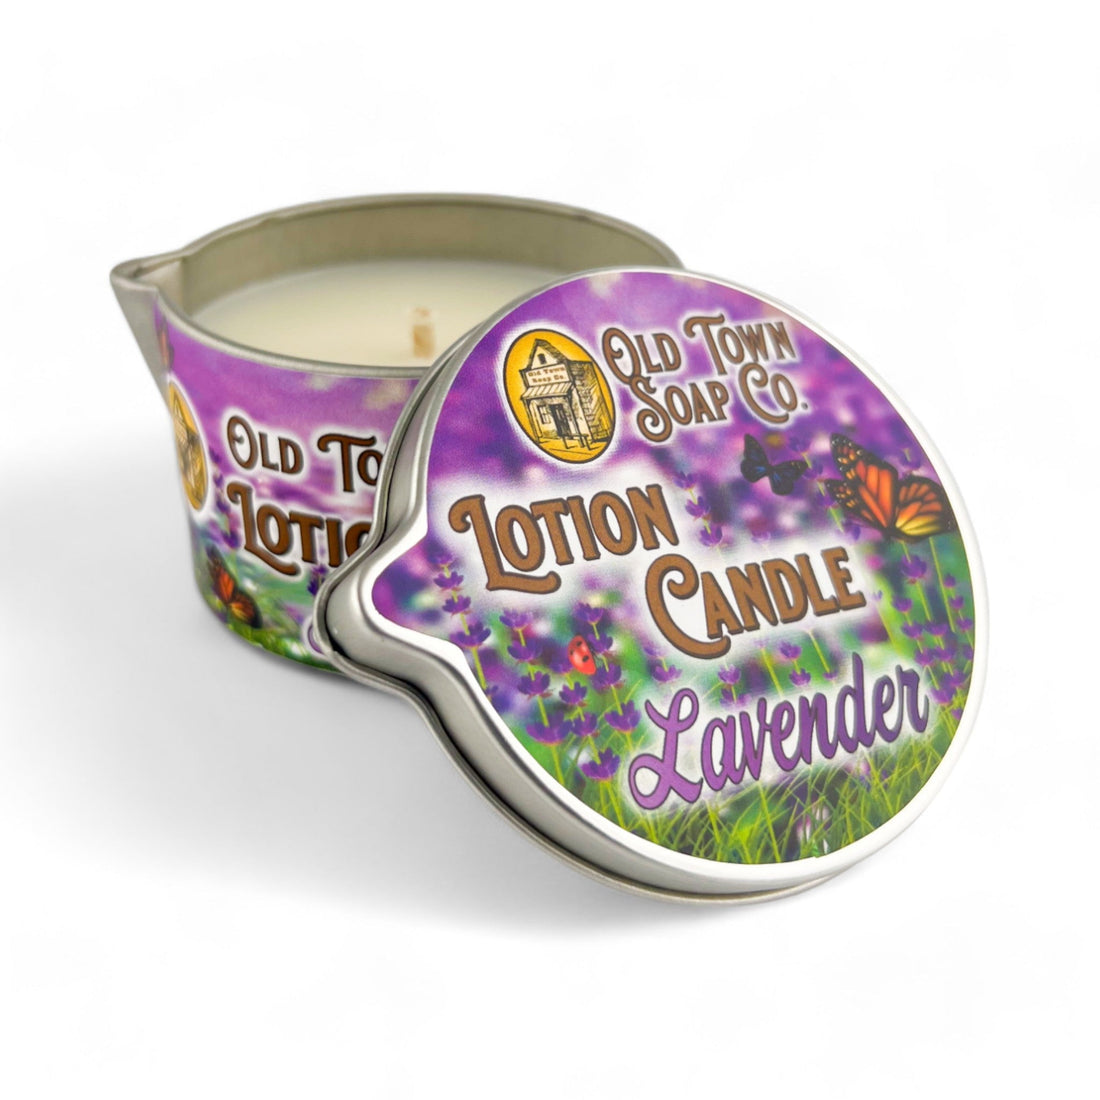 Lavender -Lotion Candle - Old Town Soap Co.